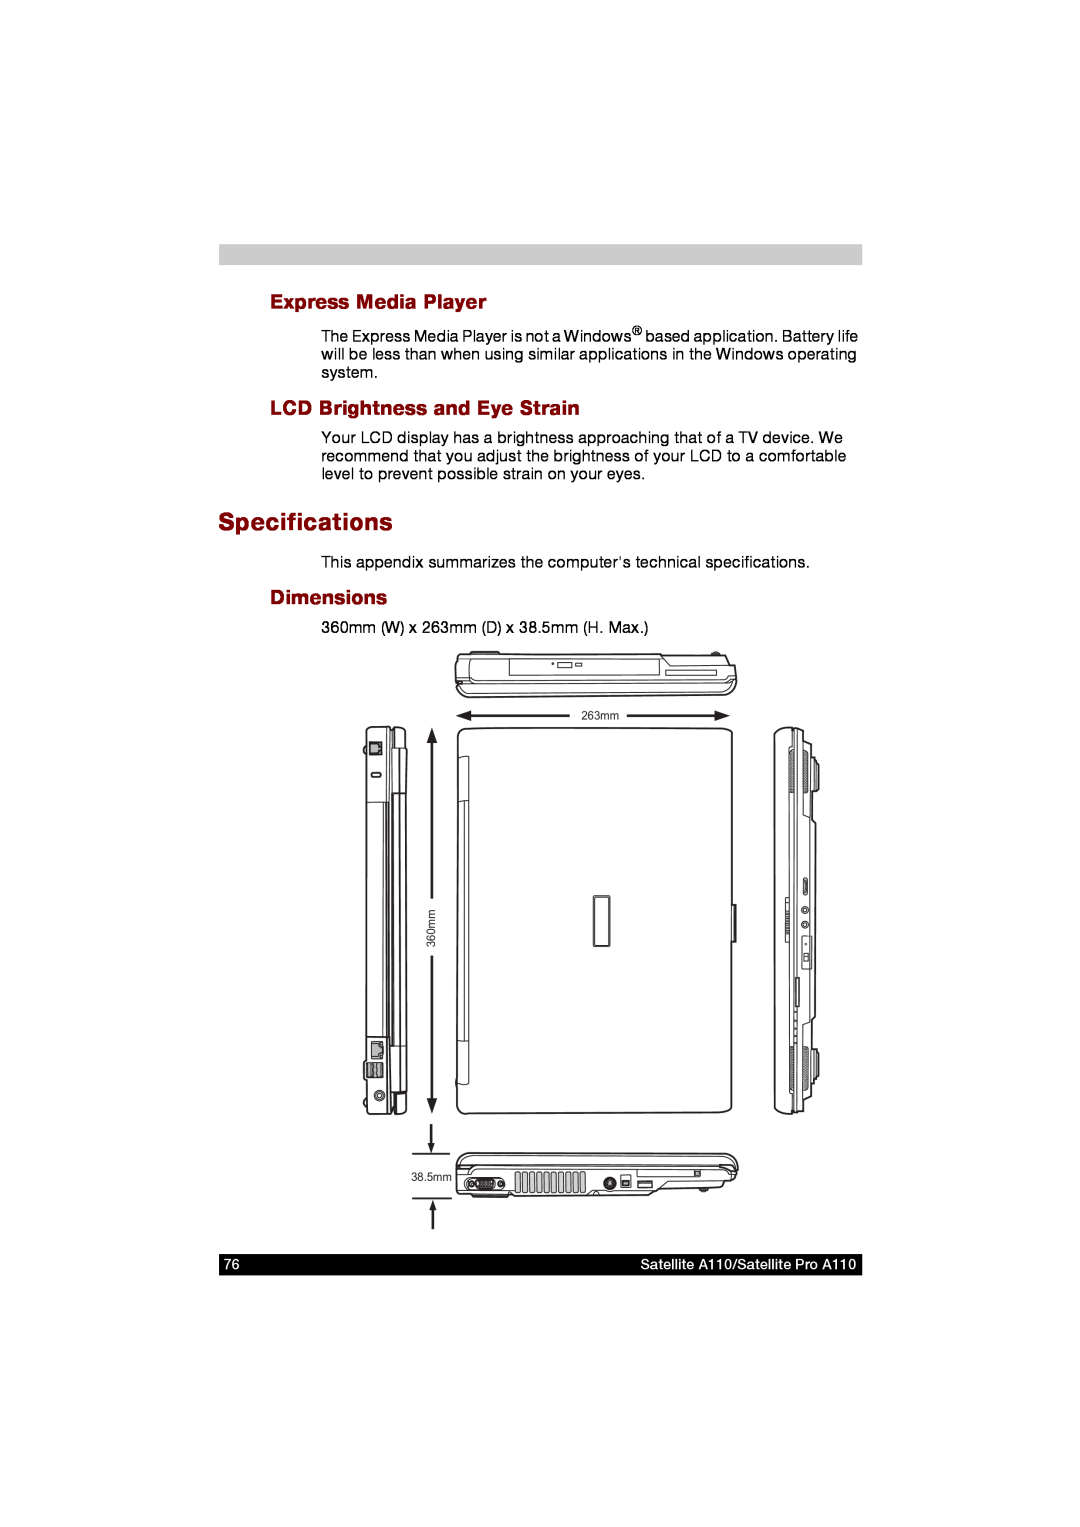 Toshiba A110 user manual Specifications, Express Media Player, LCD Brightness and Eye Strain, Dimensions 